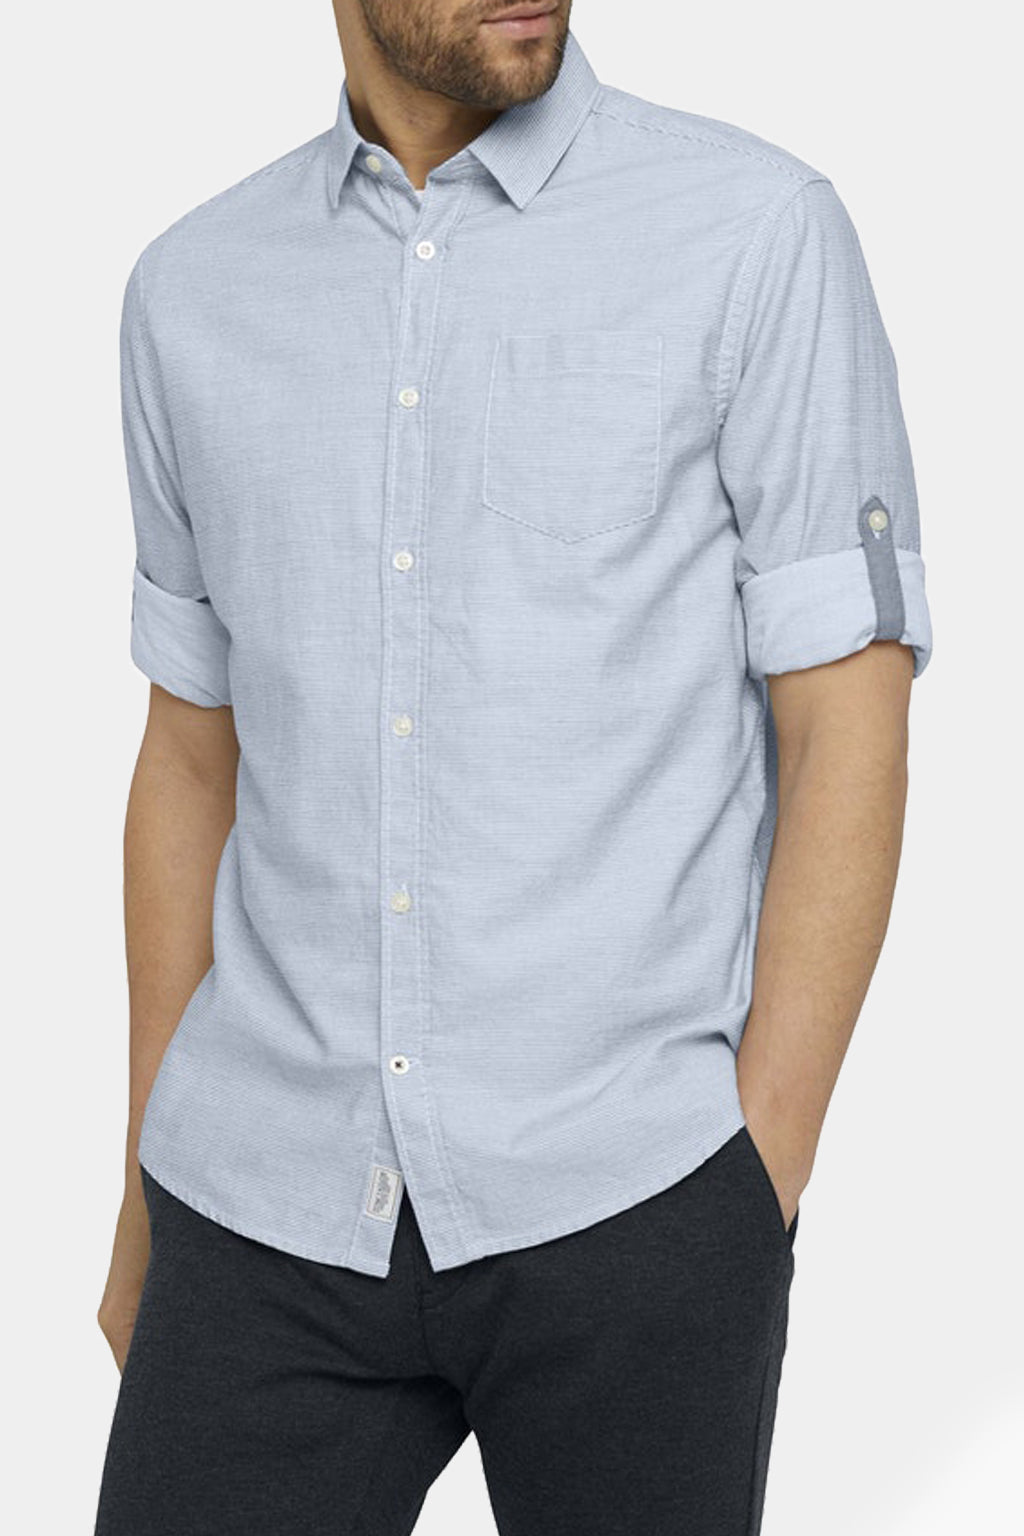 Tom Tailor - Striped Effect Shirt